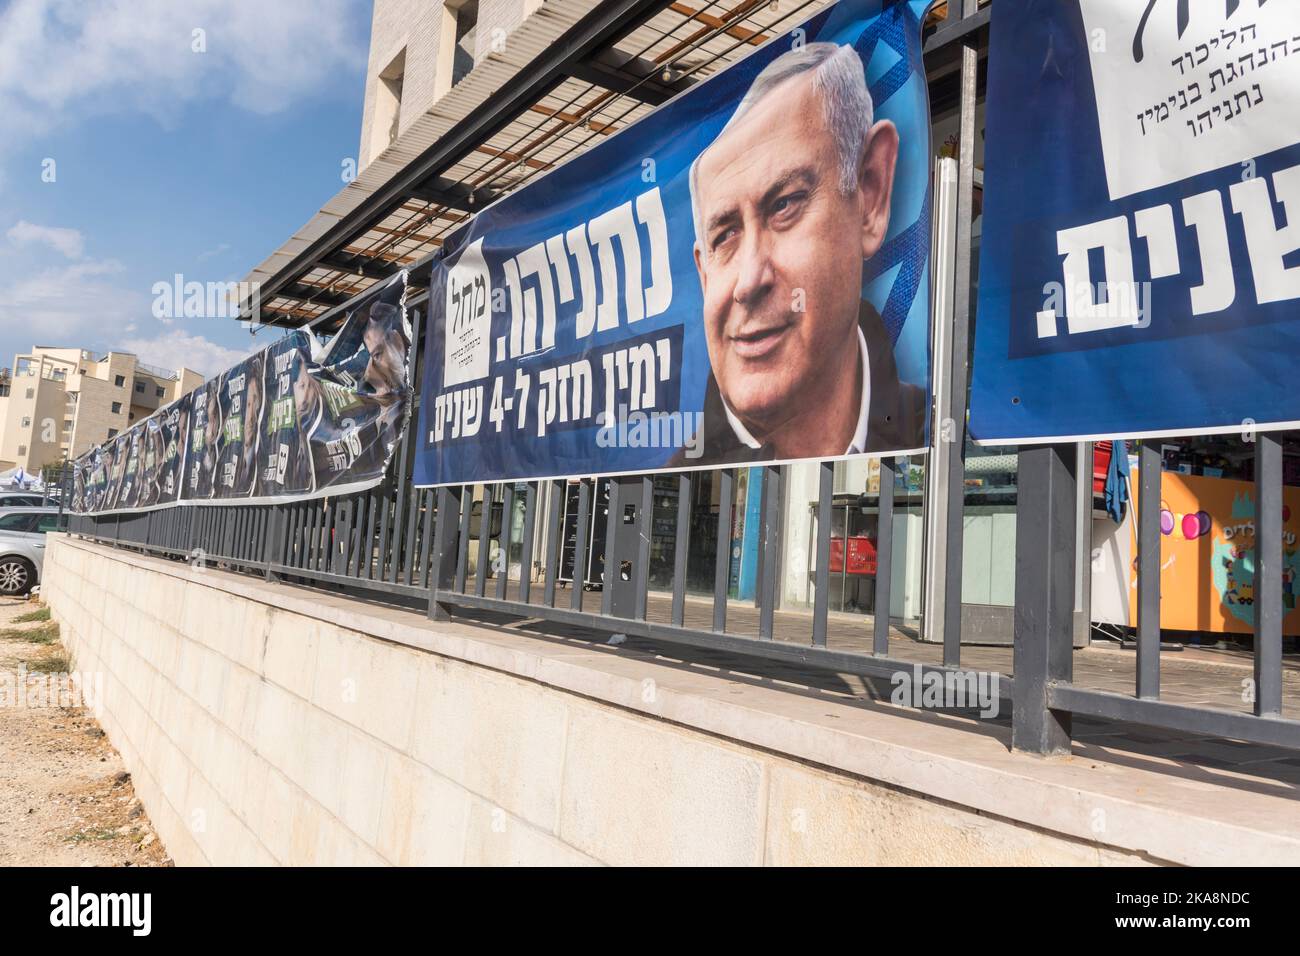 A line of banners promoting opposition leader Binyamin 'Bibi' Netanyahu and his 'Likud' (unity) party, on a wall near a ballot station, as Israel votes for the 5th time since 2019. Stock Photo